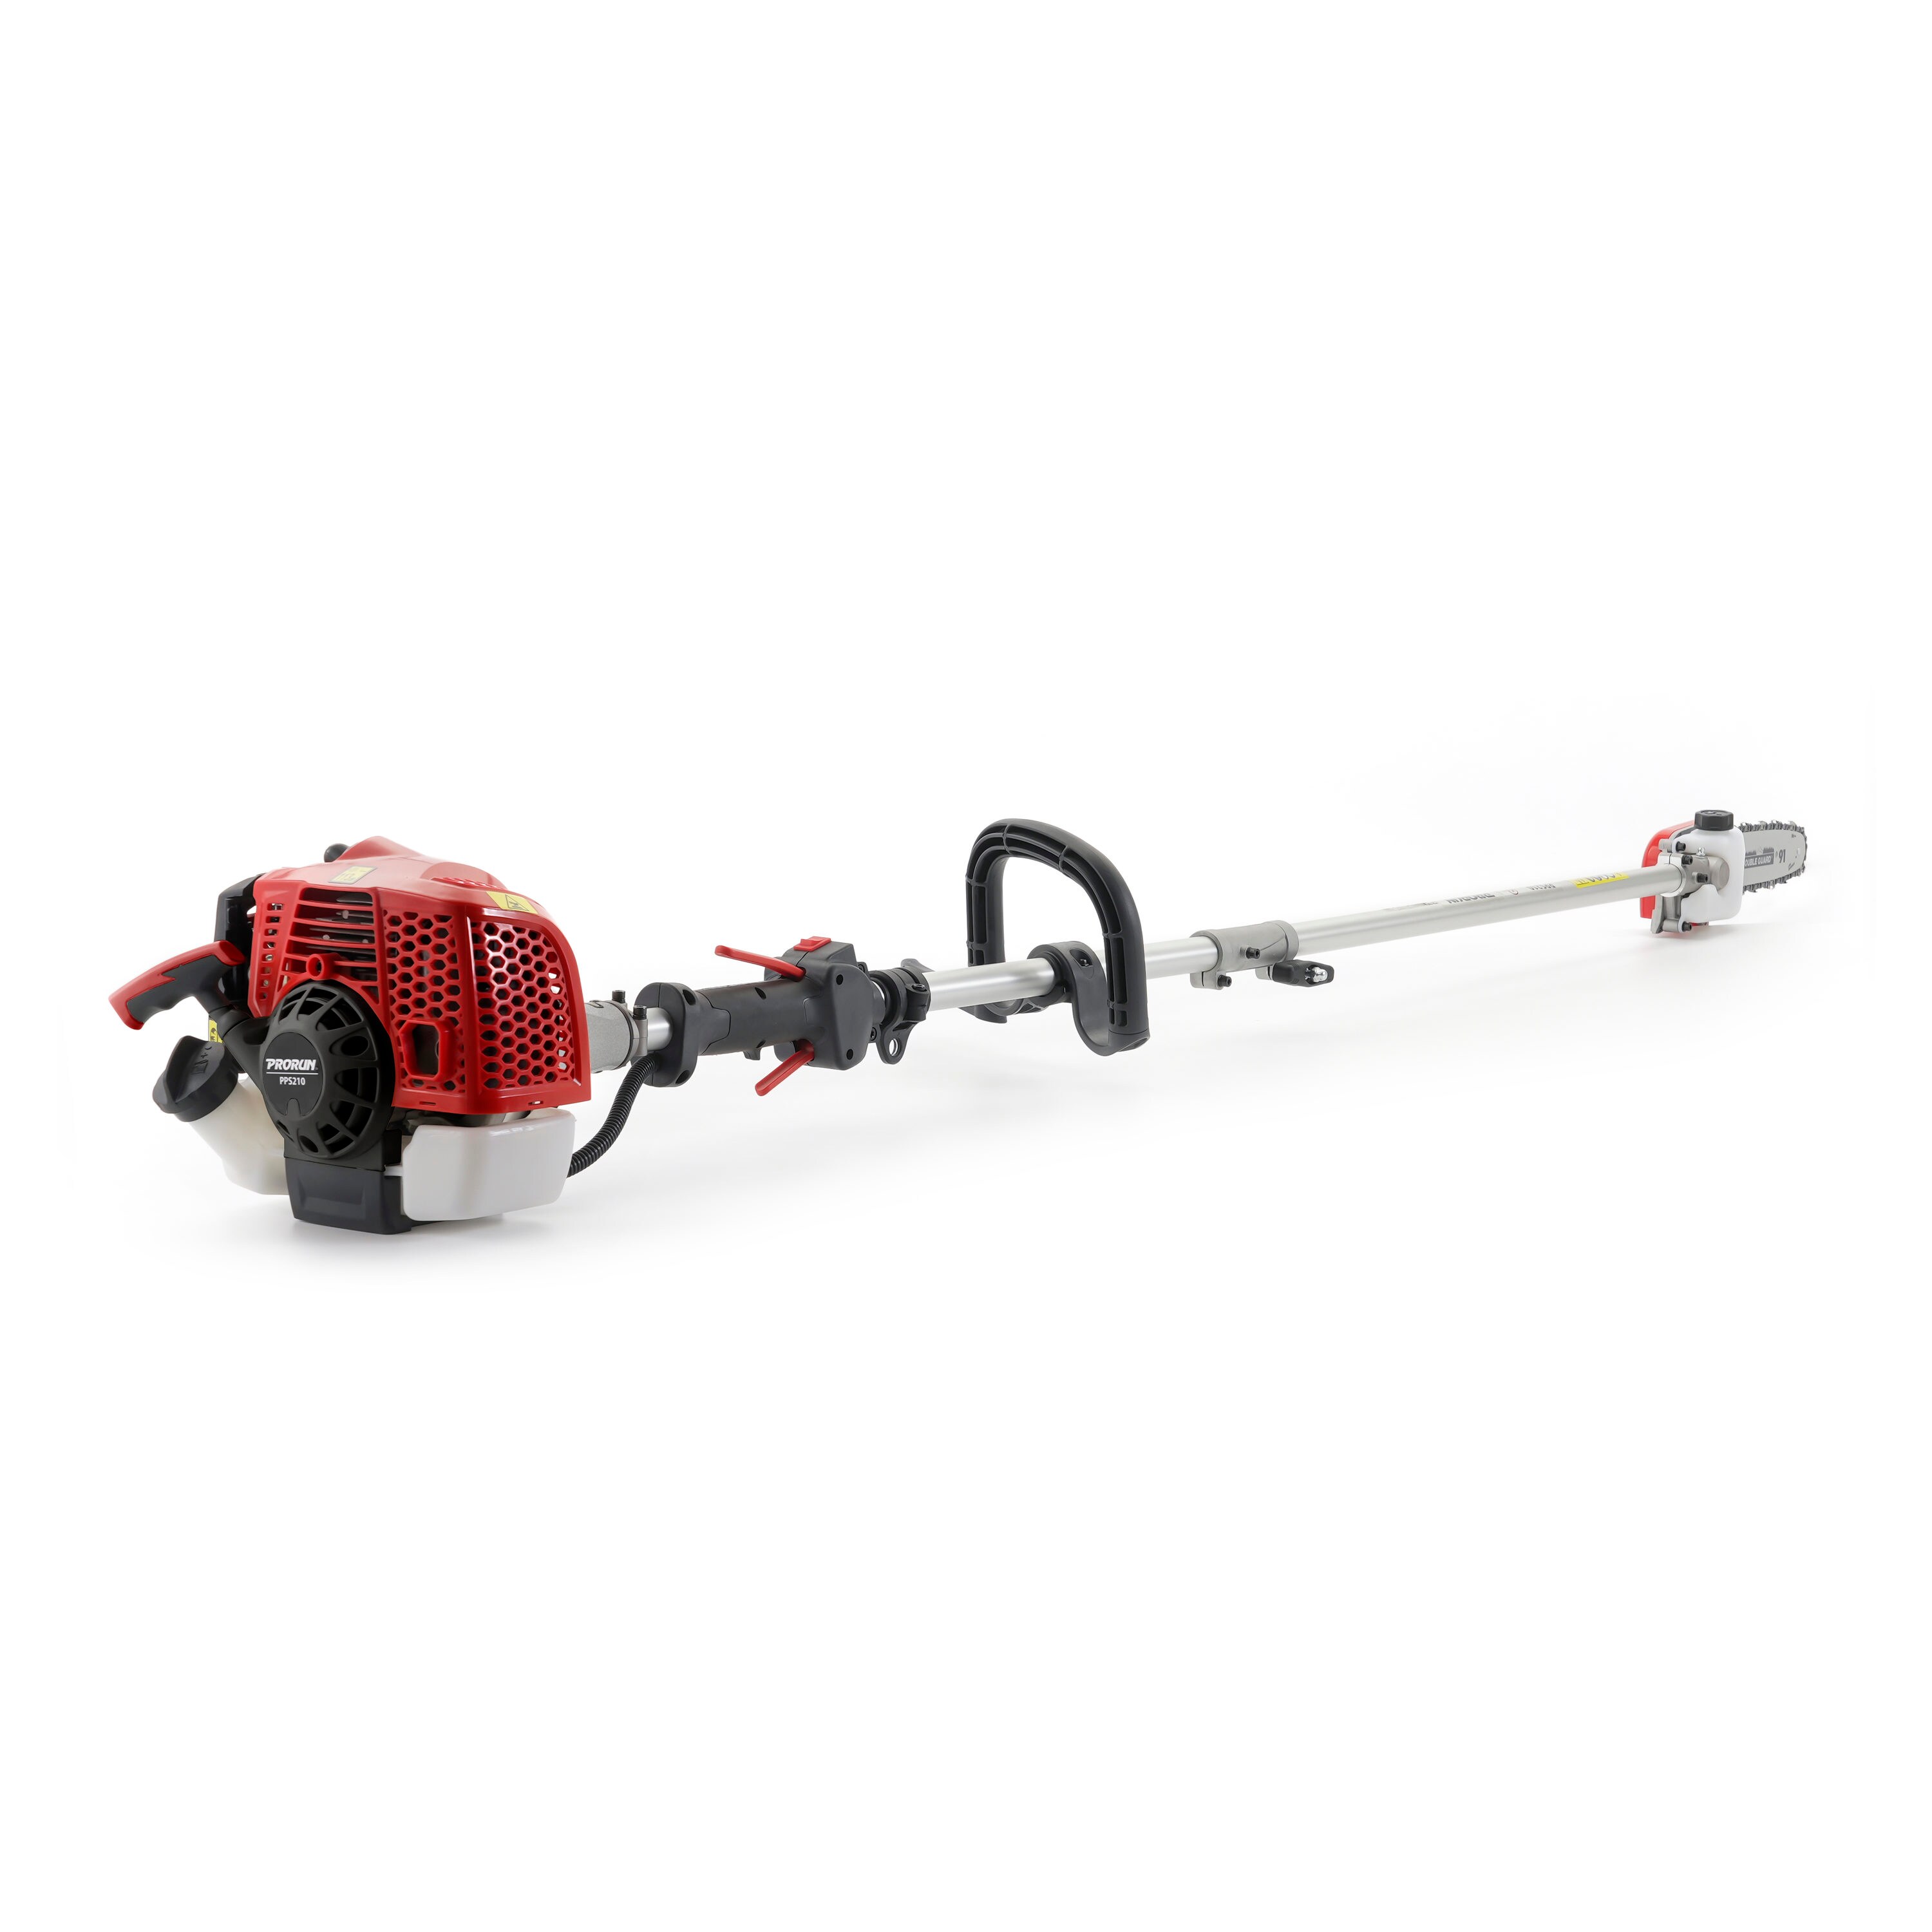 Details about   Gas-Powered Chain Pole Saw Tree Trimmer 3-HP 2-Stroke w/ Extension Pole 